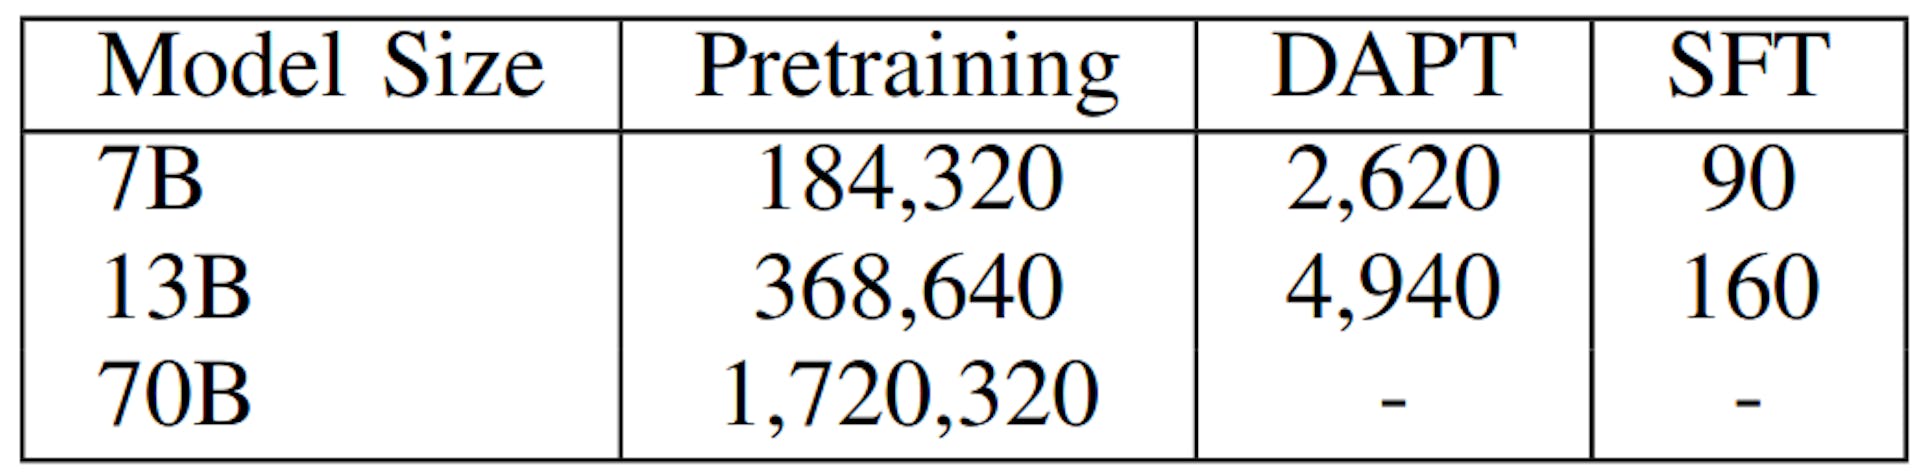 TABLE IV: Training cost of LLaMA2 models in GPU hours. Pretraining cost from [5].